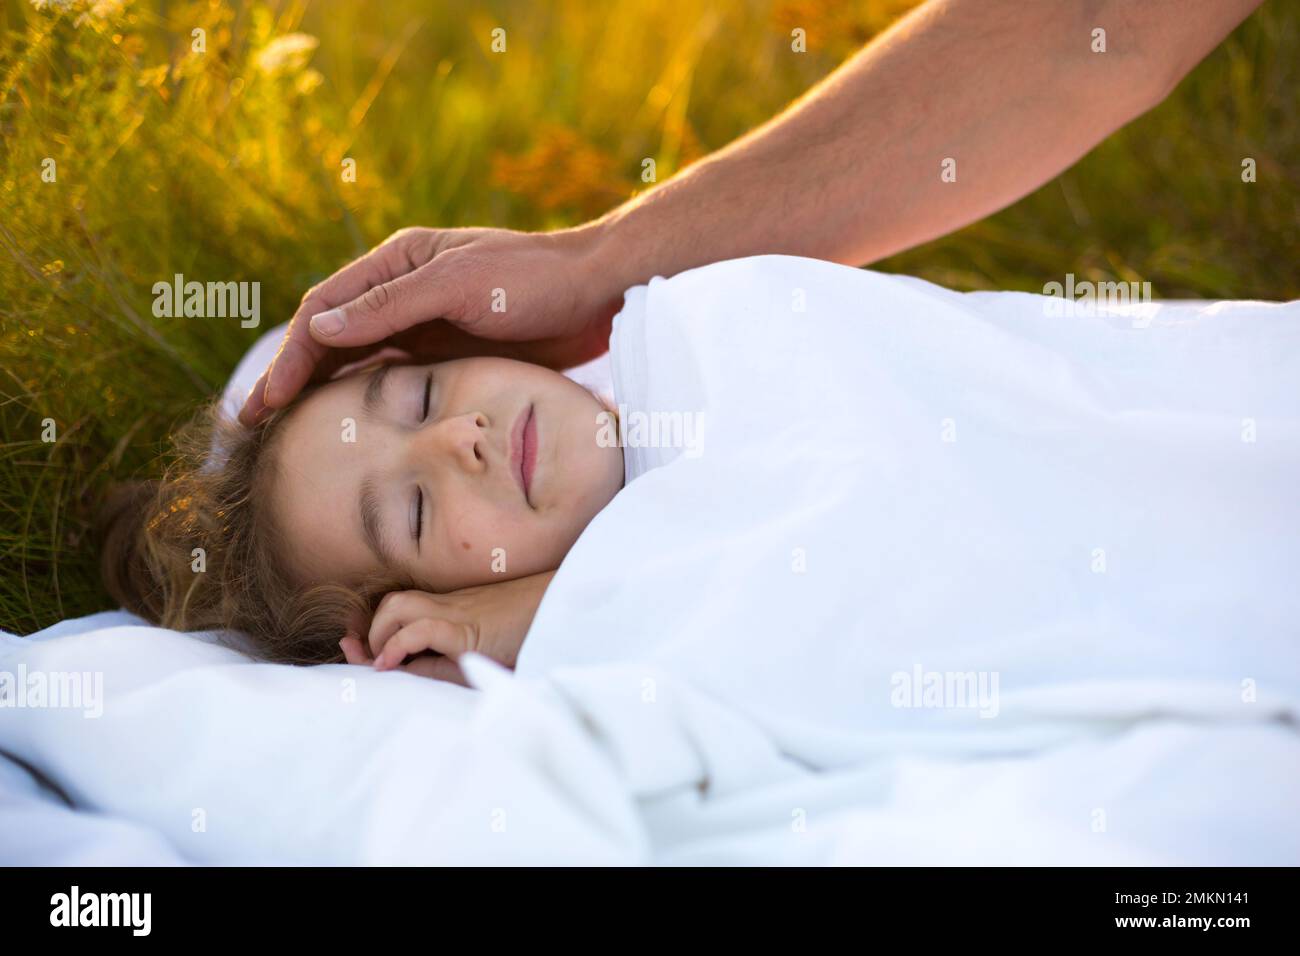 Girl sleeps on white bed in the grass, fresh air. Dad's hand gently pats his head. Care, protection, International Children's Day, mosquito bites Stock Photo